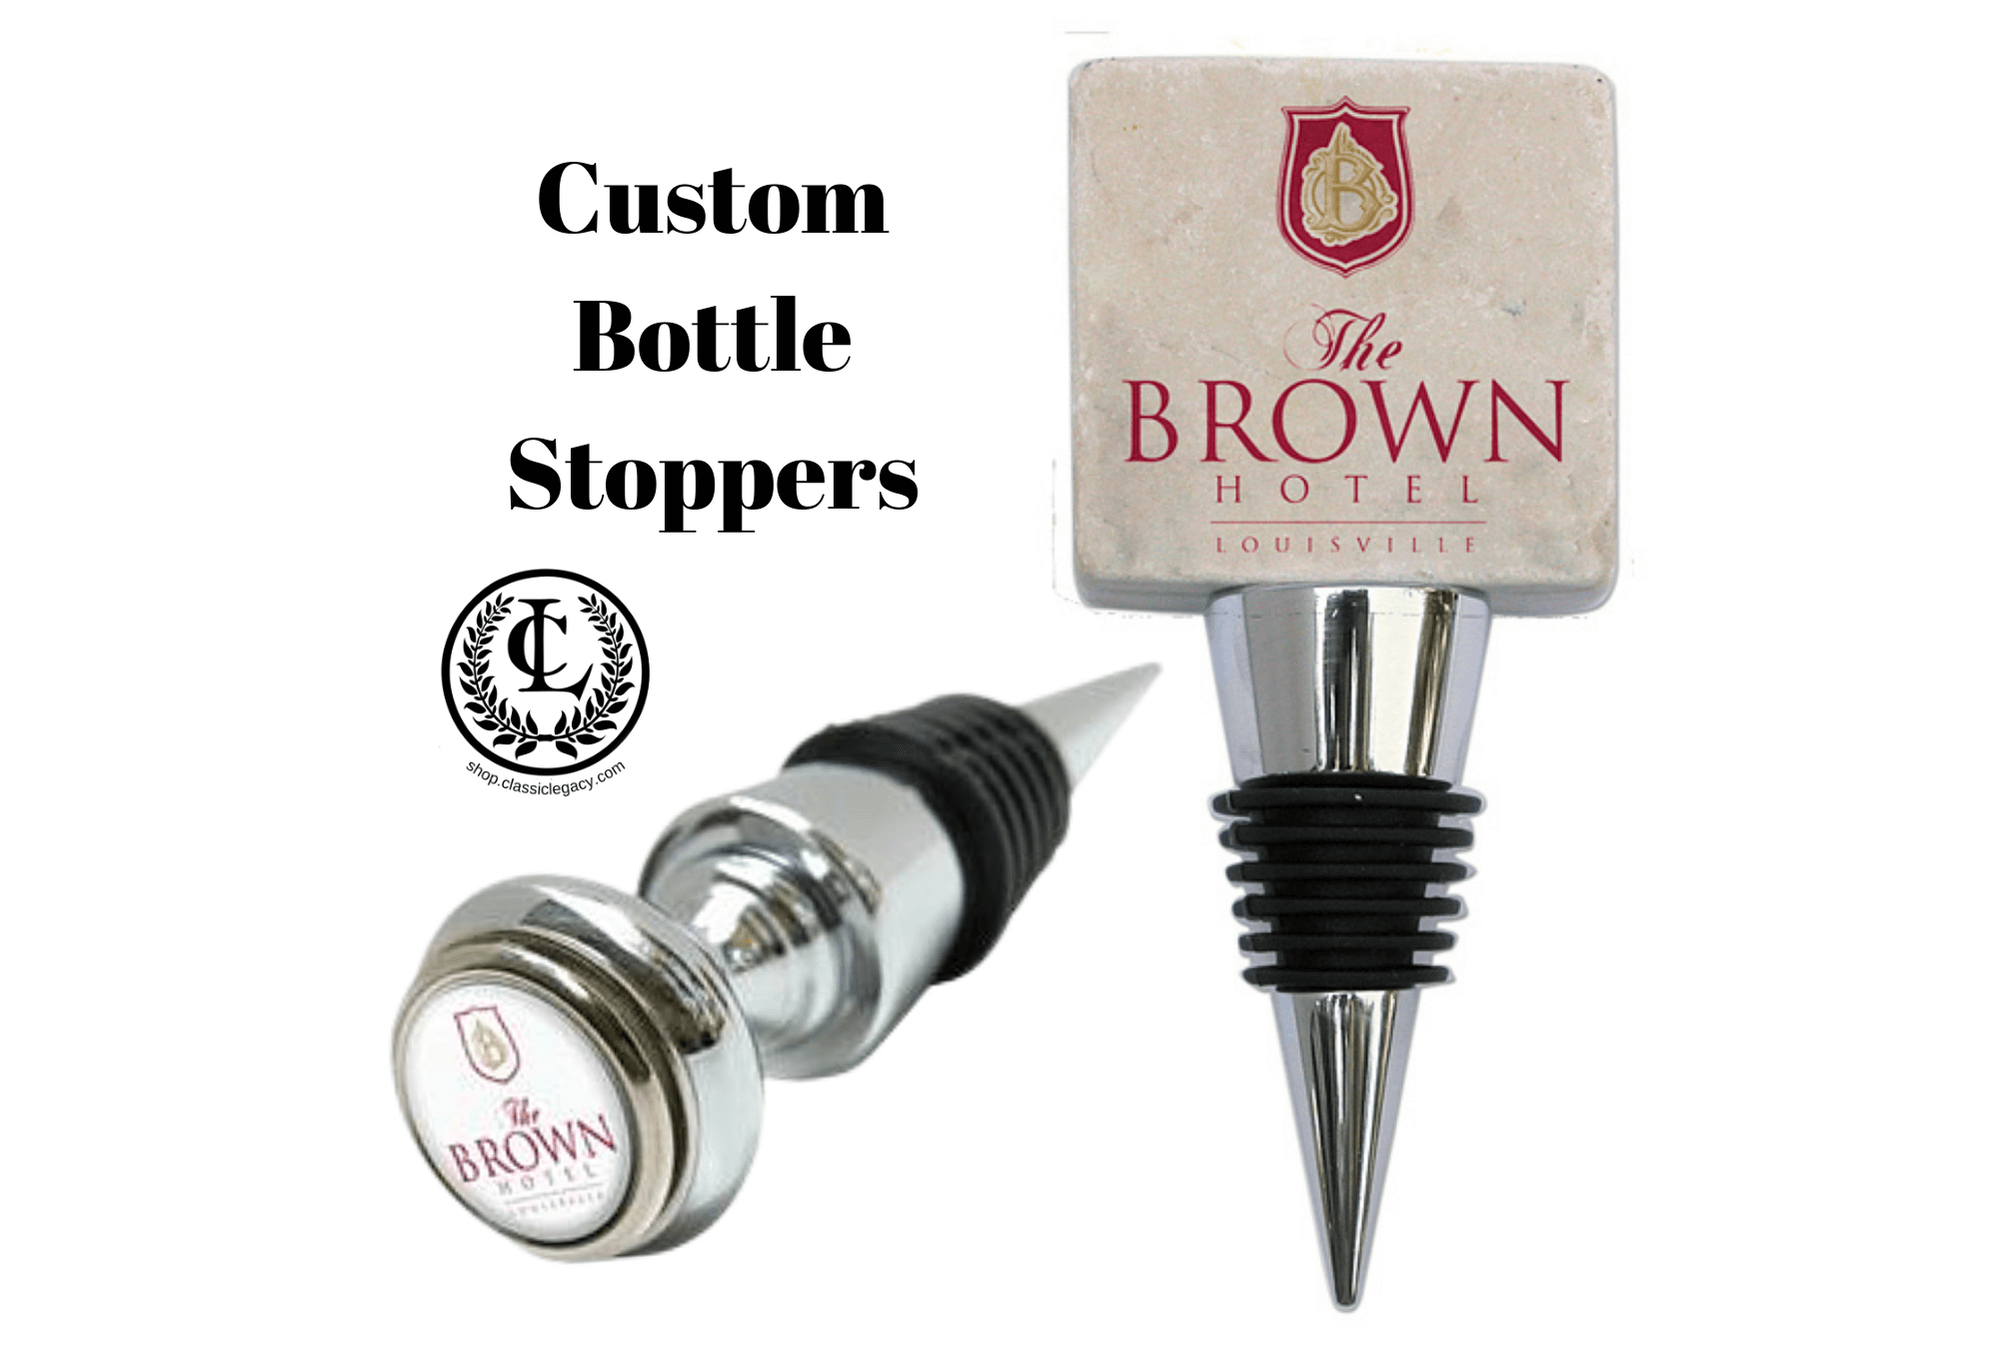 Custom personalized bottle stoppers with logo of The Brown Hotel